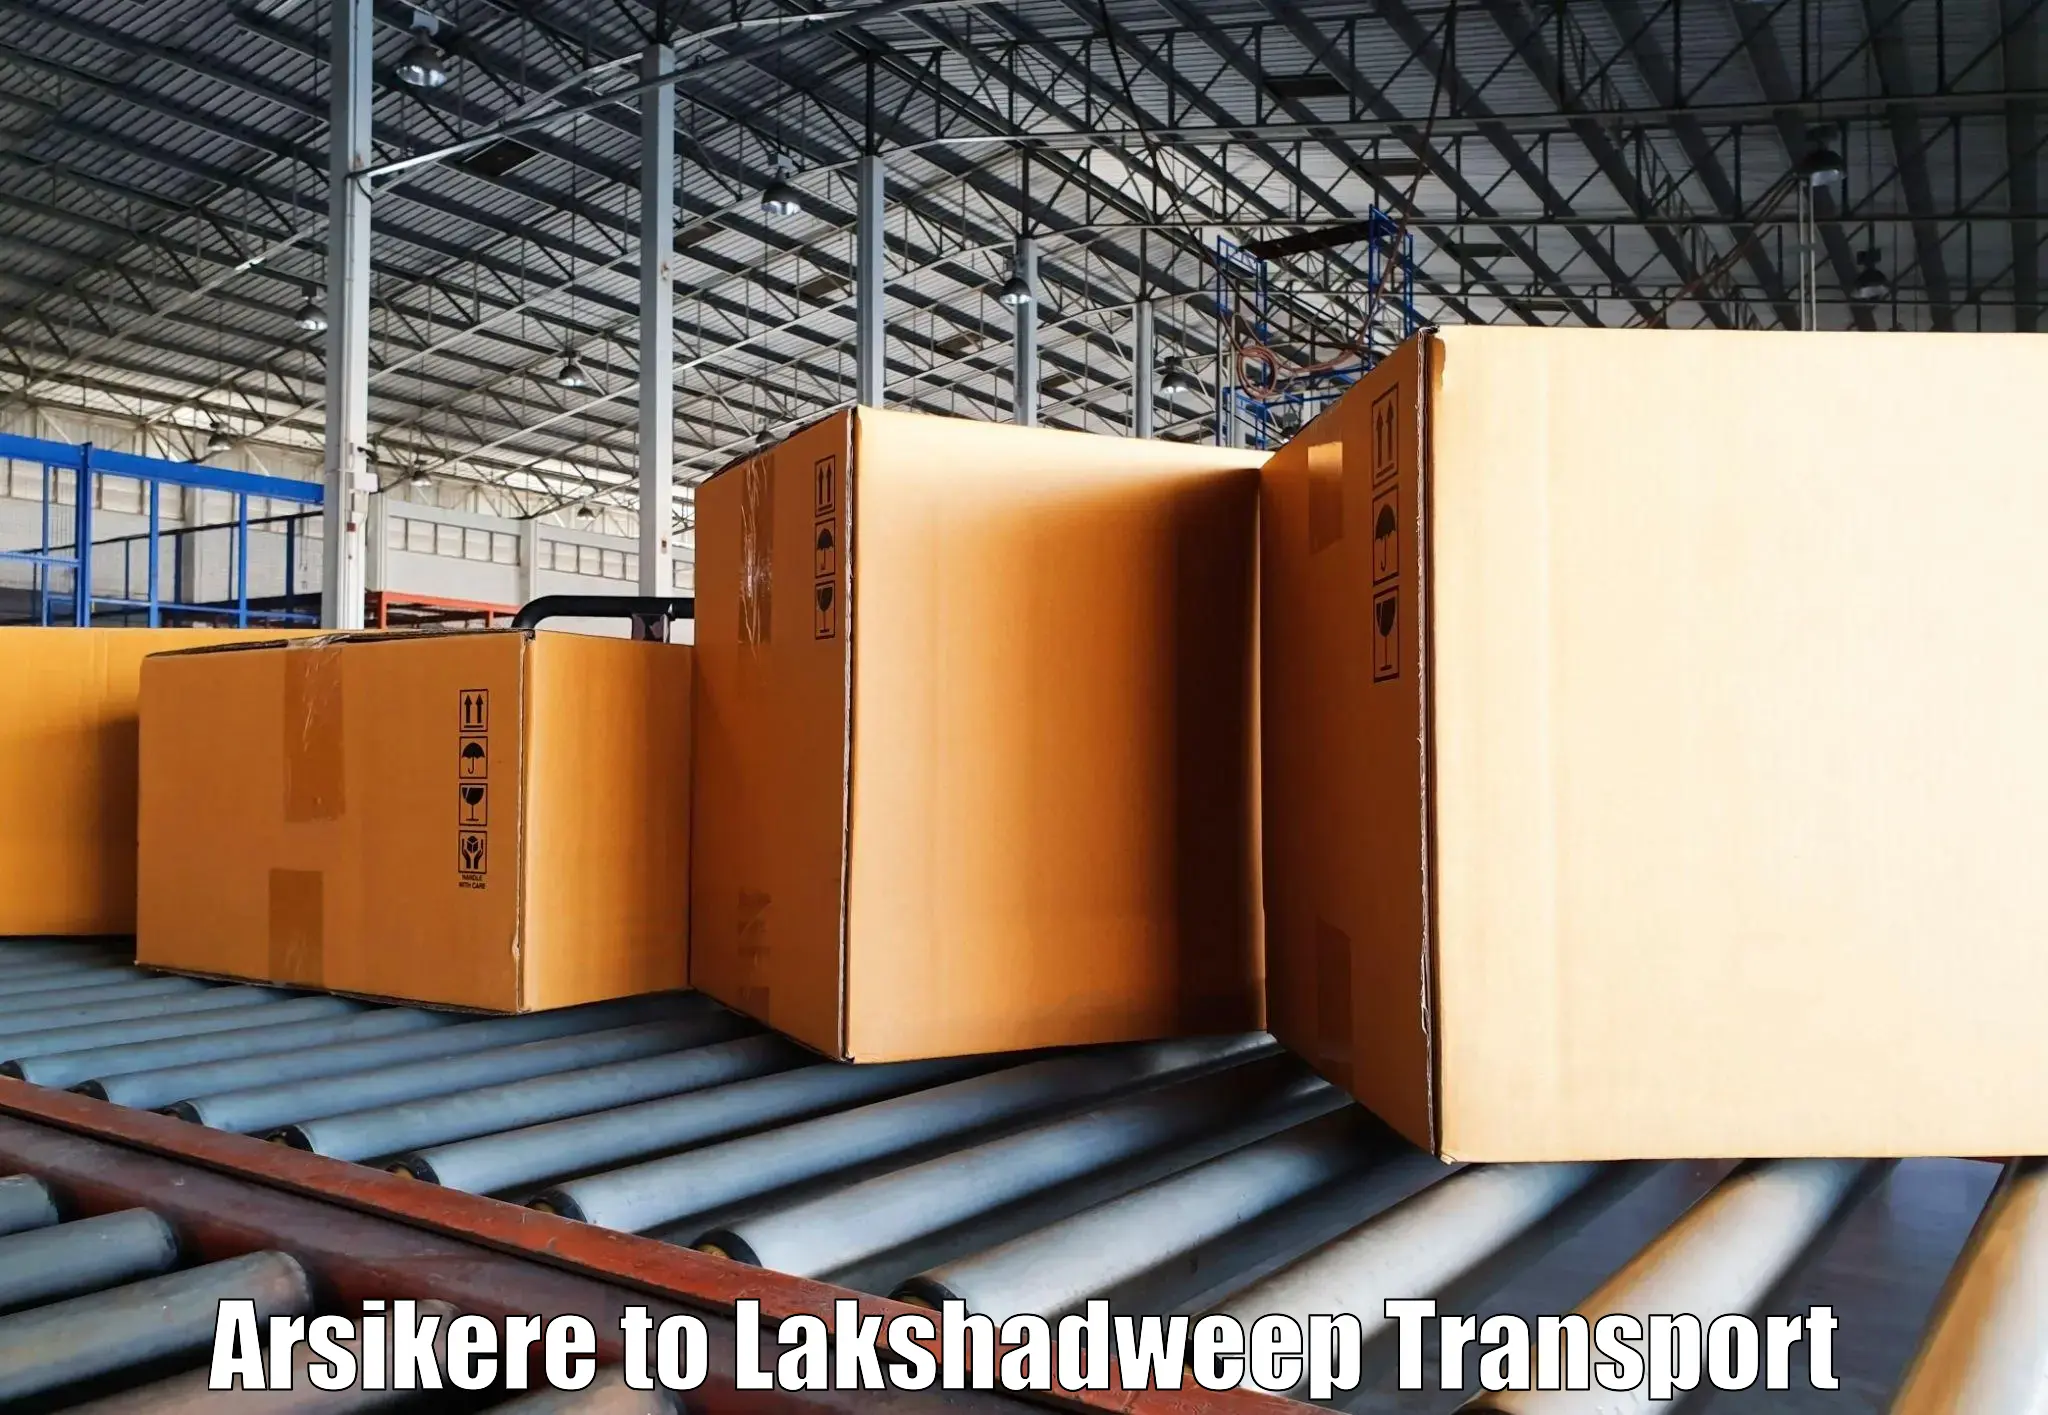 Transport bike from one state to another Arsikere to Lakshadweep